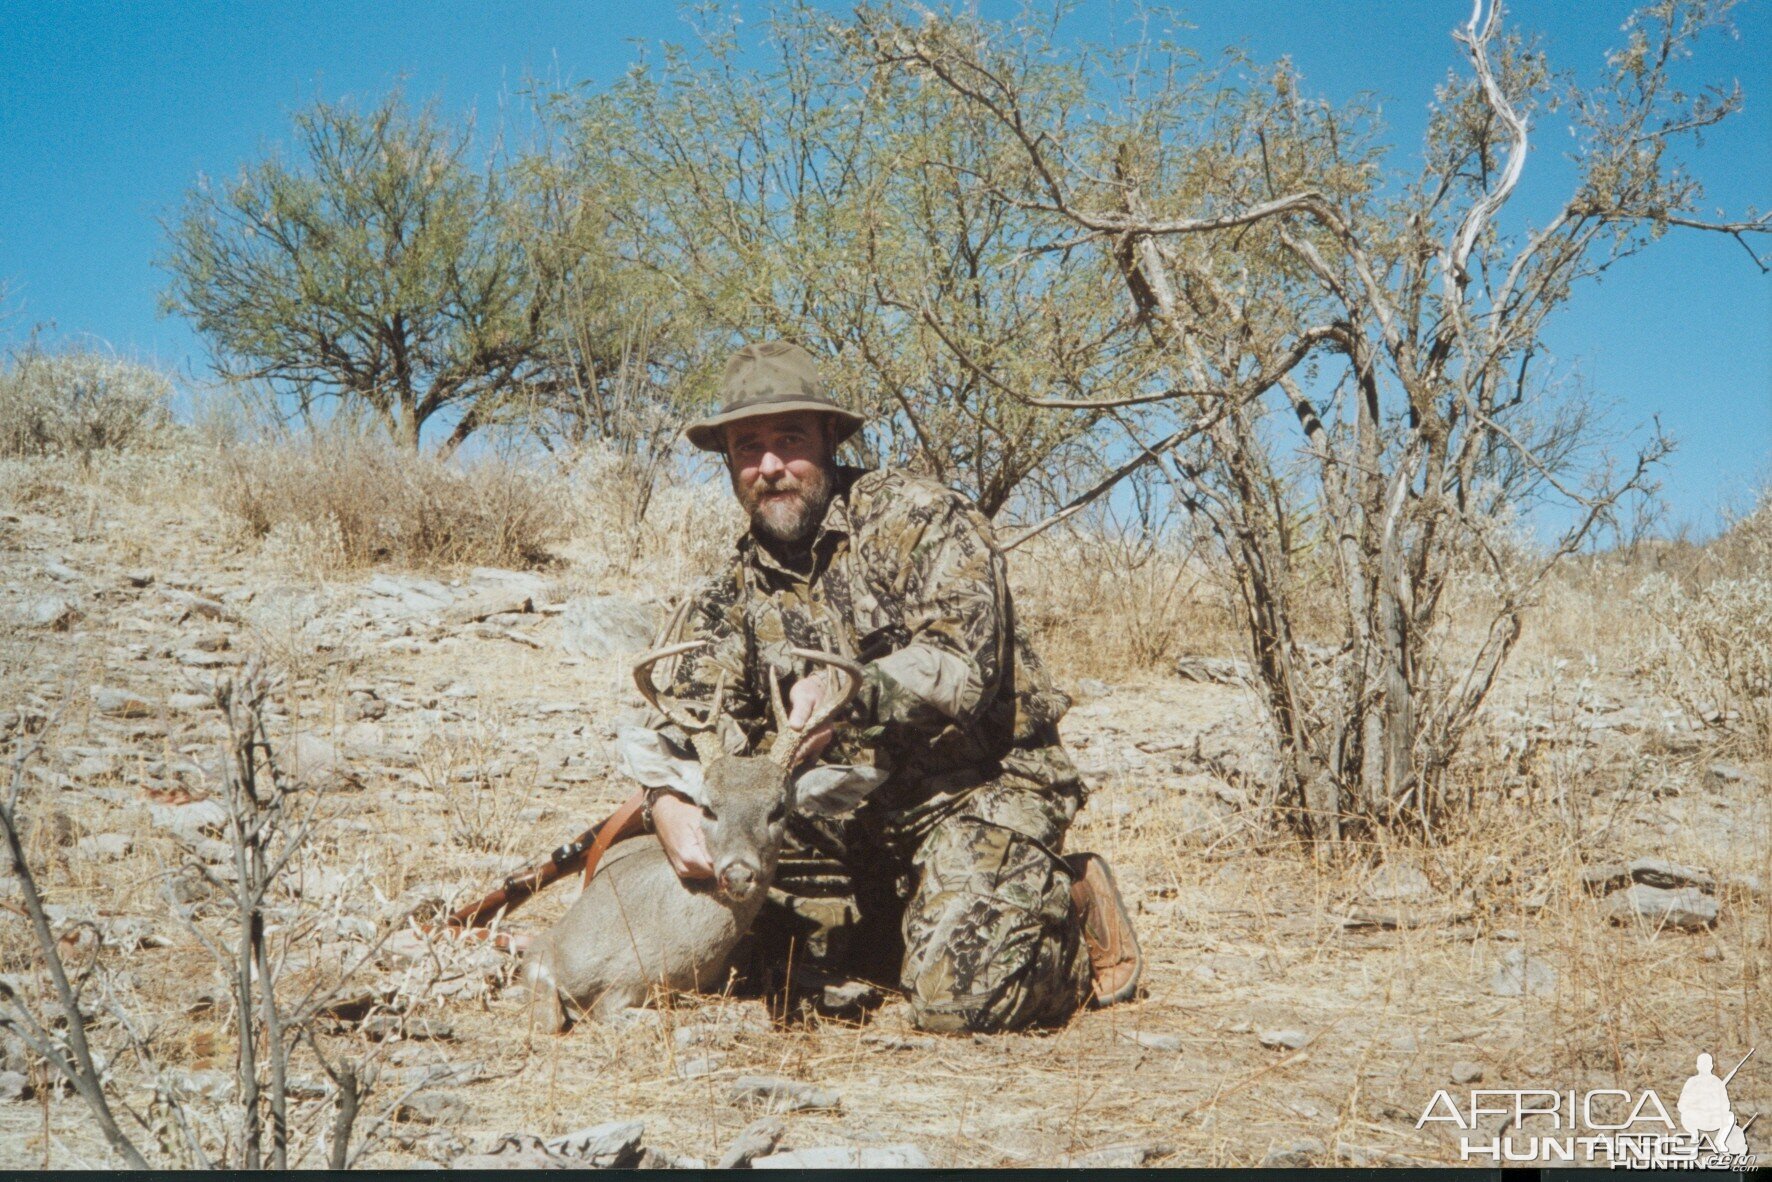 Coues deer hunt Sonora, Mexico